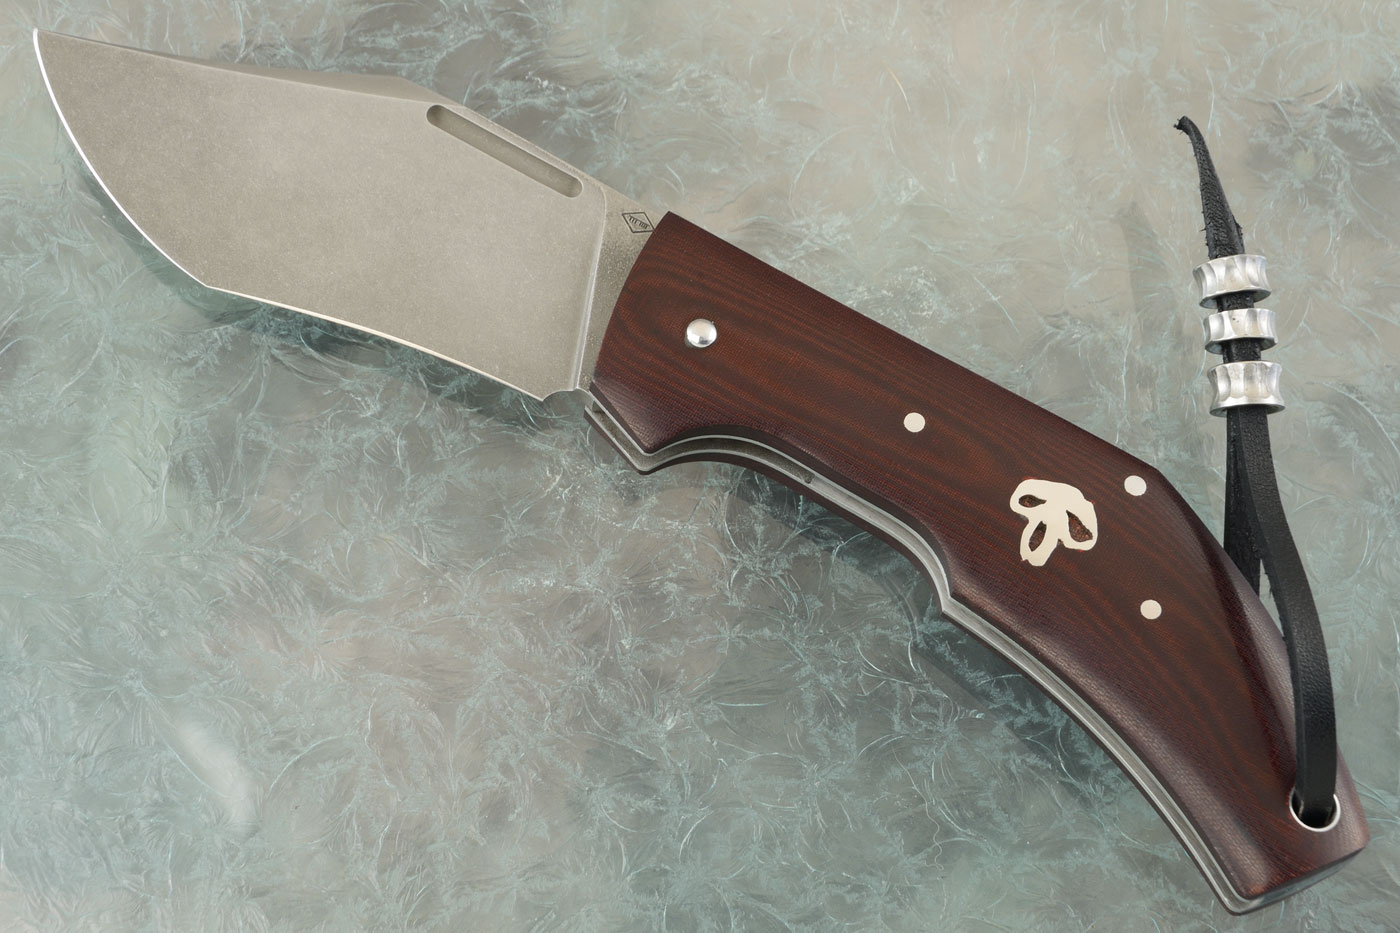 Superbad Slipjoint Folder with Burgundy Micarta with Skull Inlay